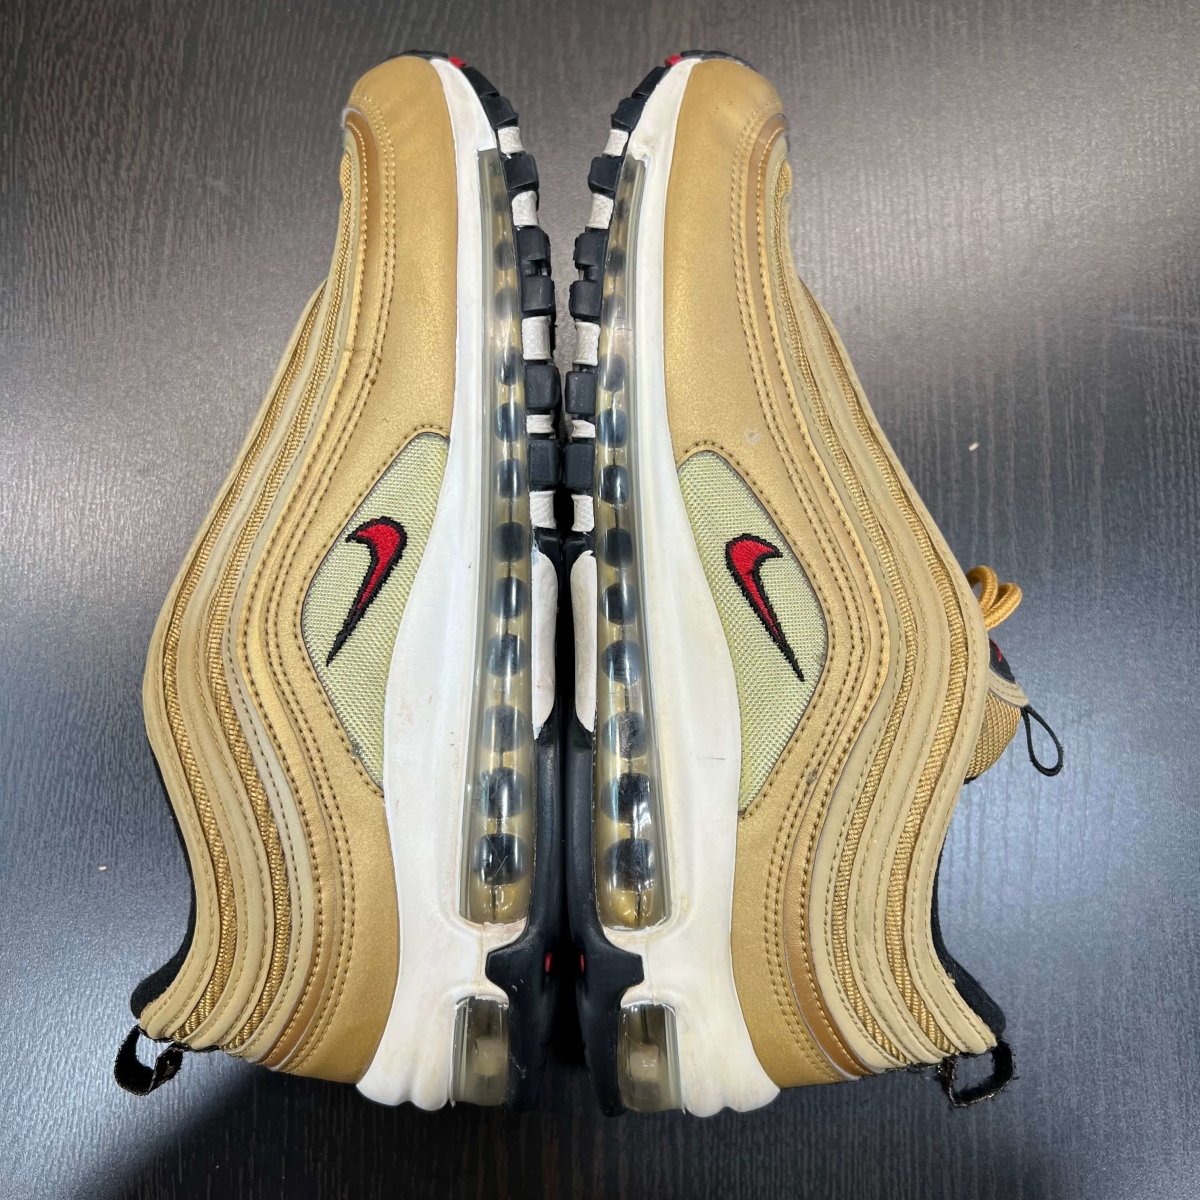 Air Max 97 OG QS 'Metallic Gold' - Gently Enjoyed (Used) Men 9.5 - Low Sneaker - Nike - Jawns on Fire